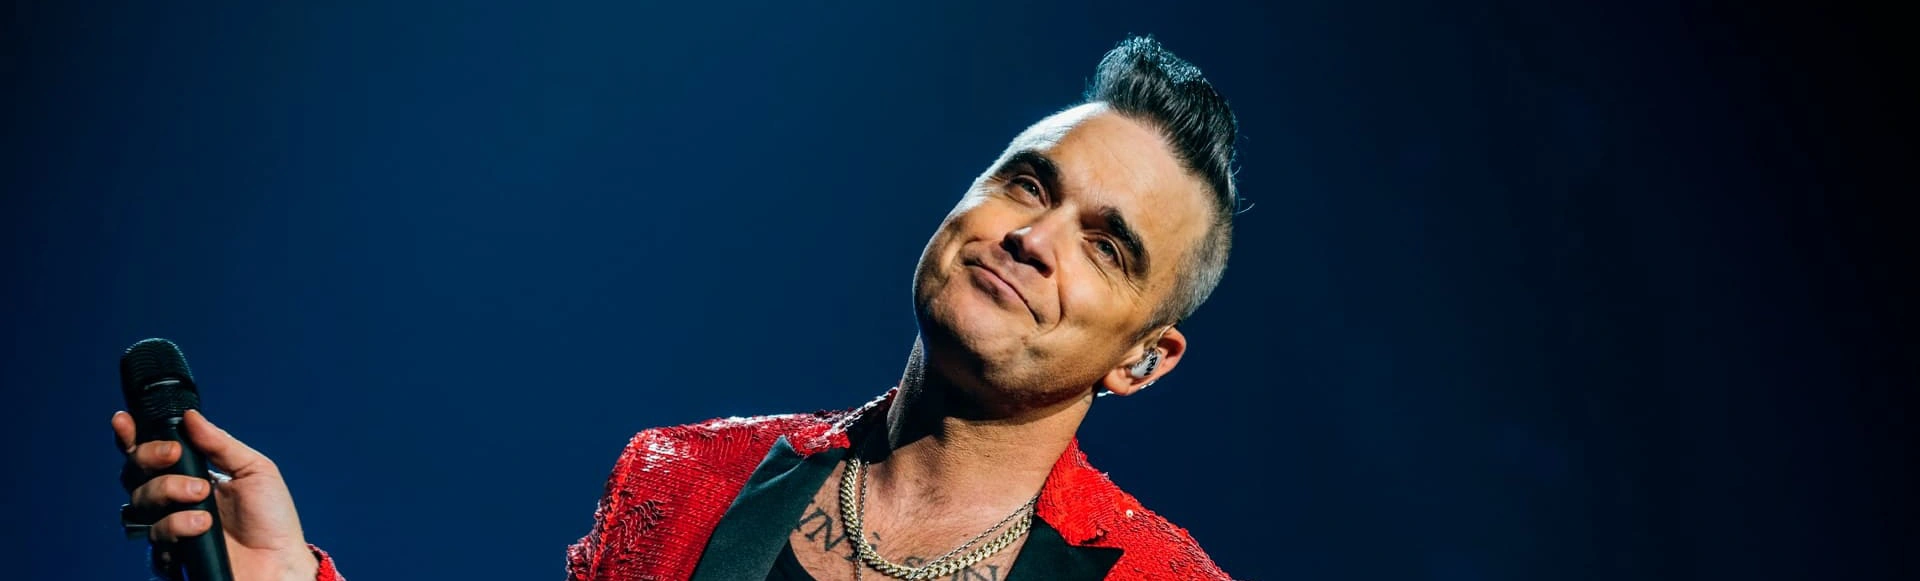 The iconic Robbie Williams is ready to rock Abu Dhabi!